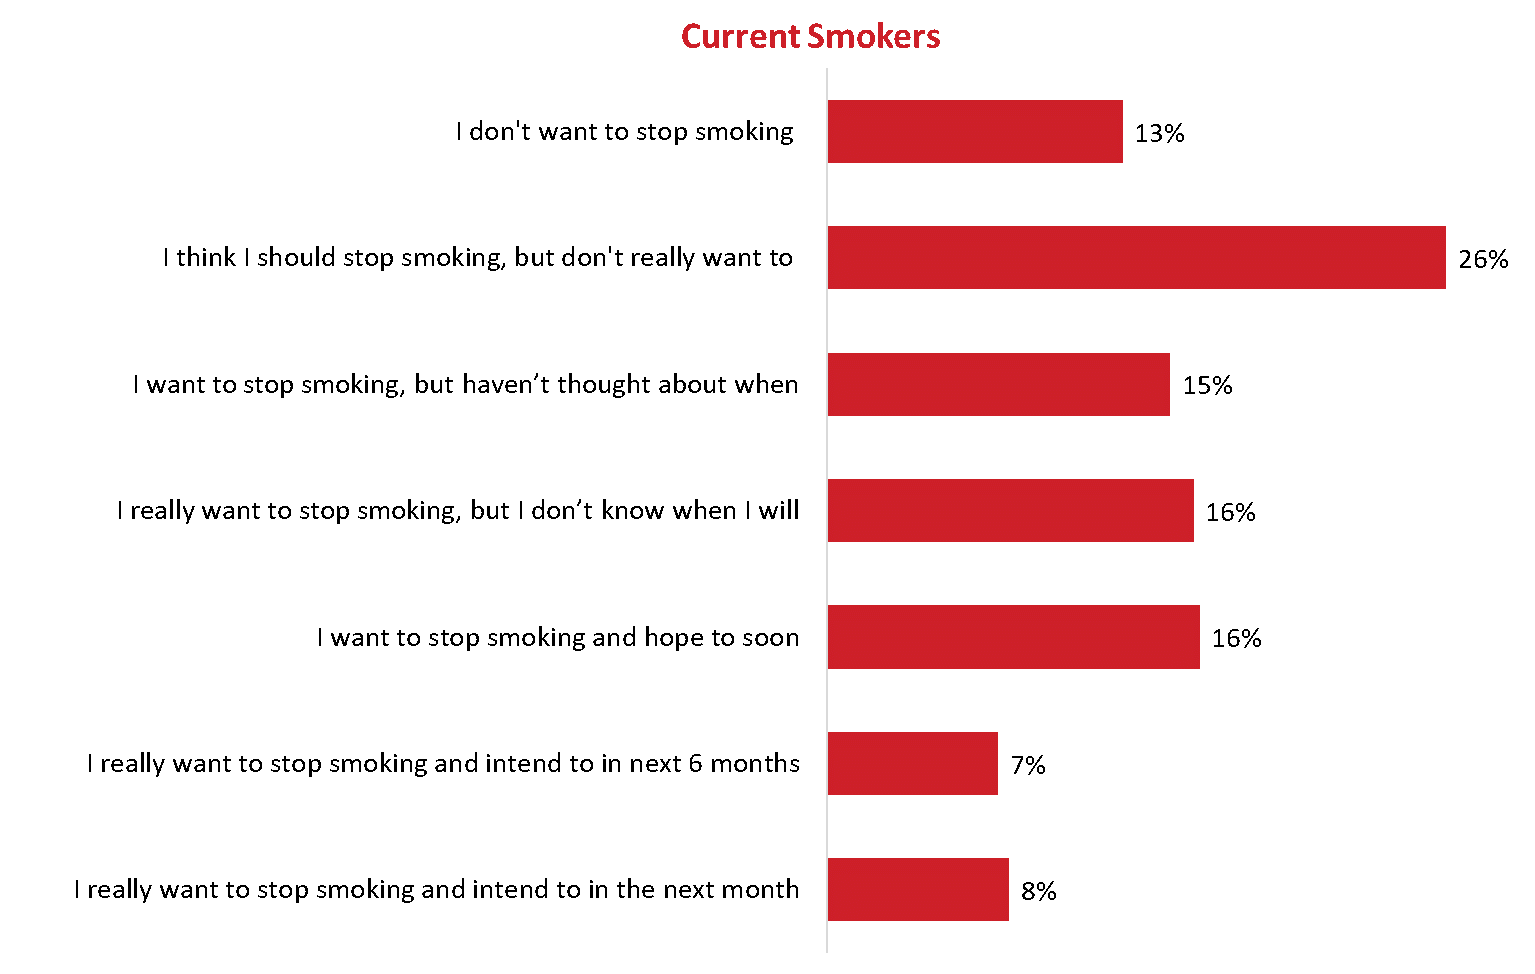 Figure 44: Readiness to quit [current smokers]